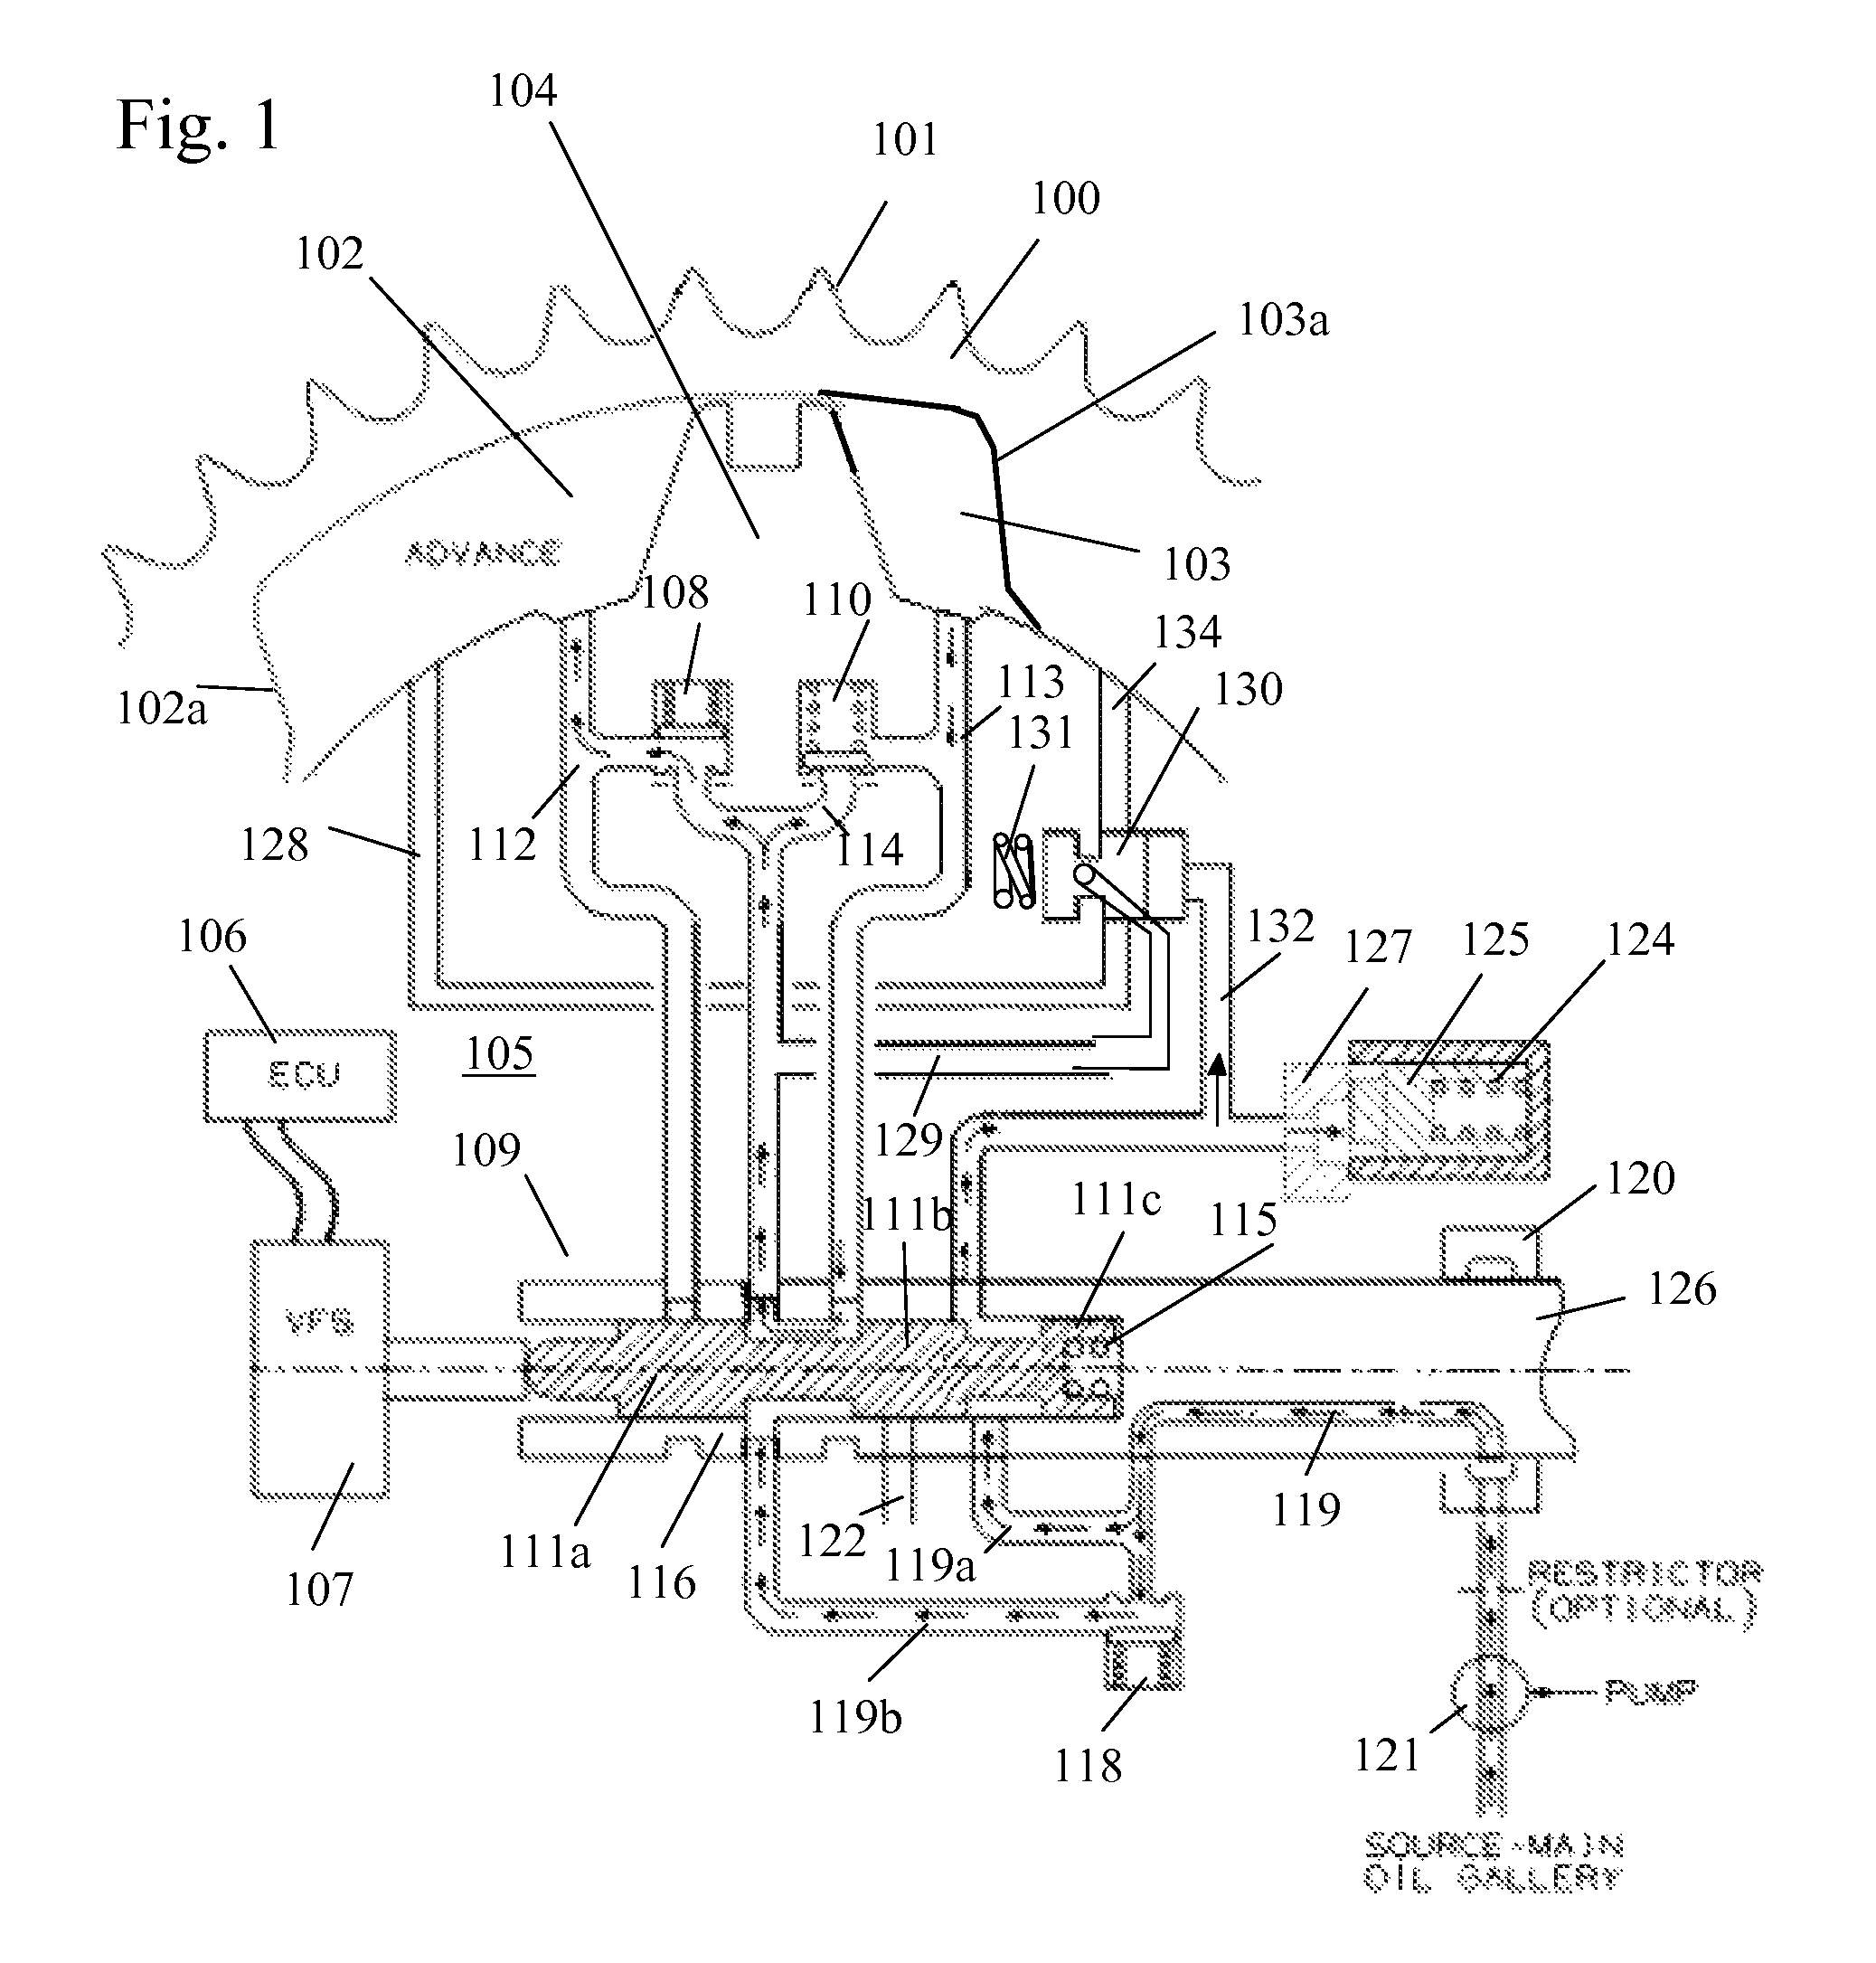 Variable camshaft timing device with hydraulic lock in an intermediate position